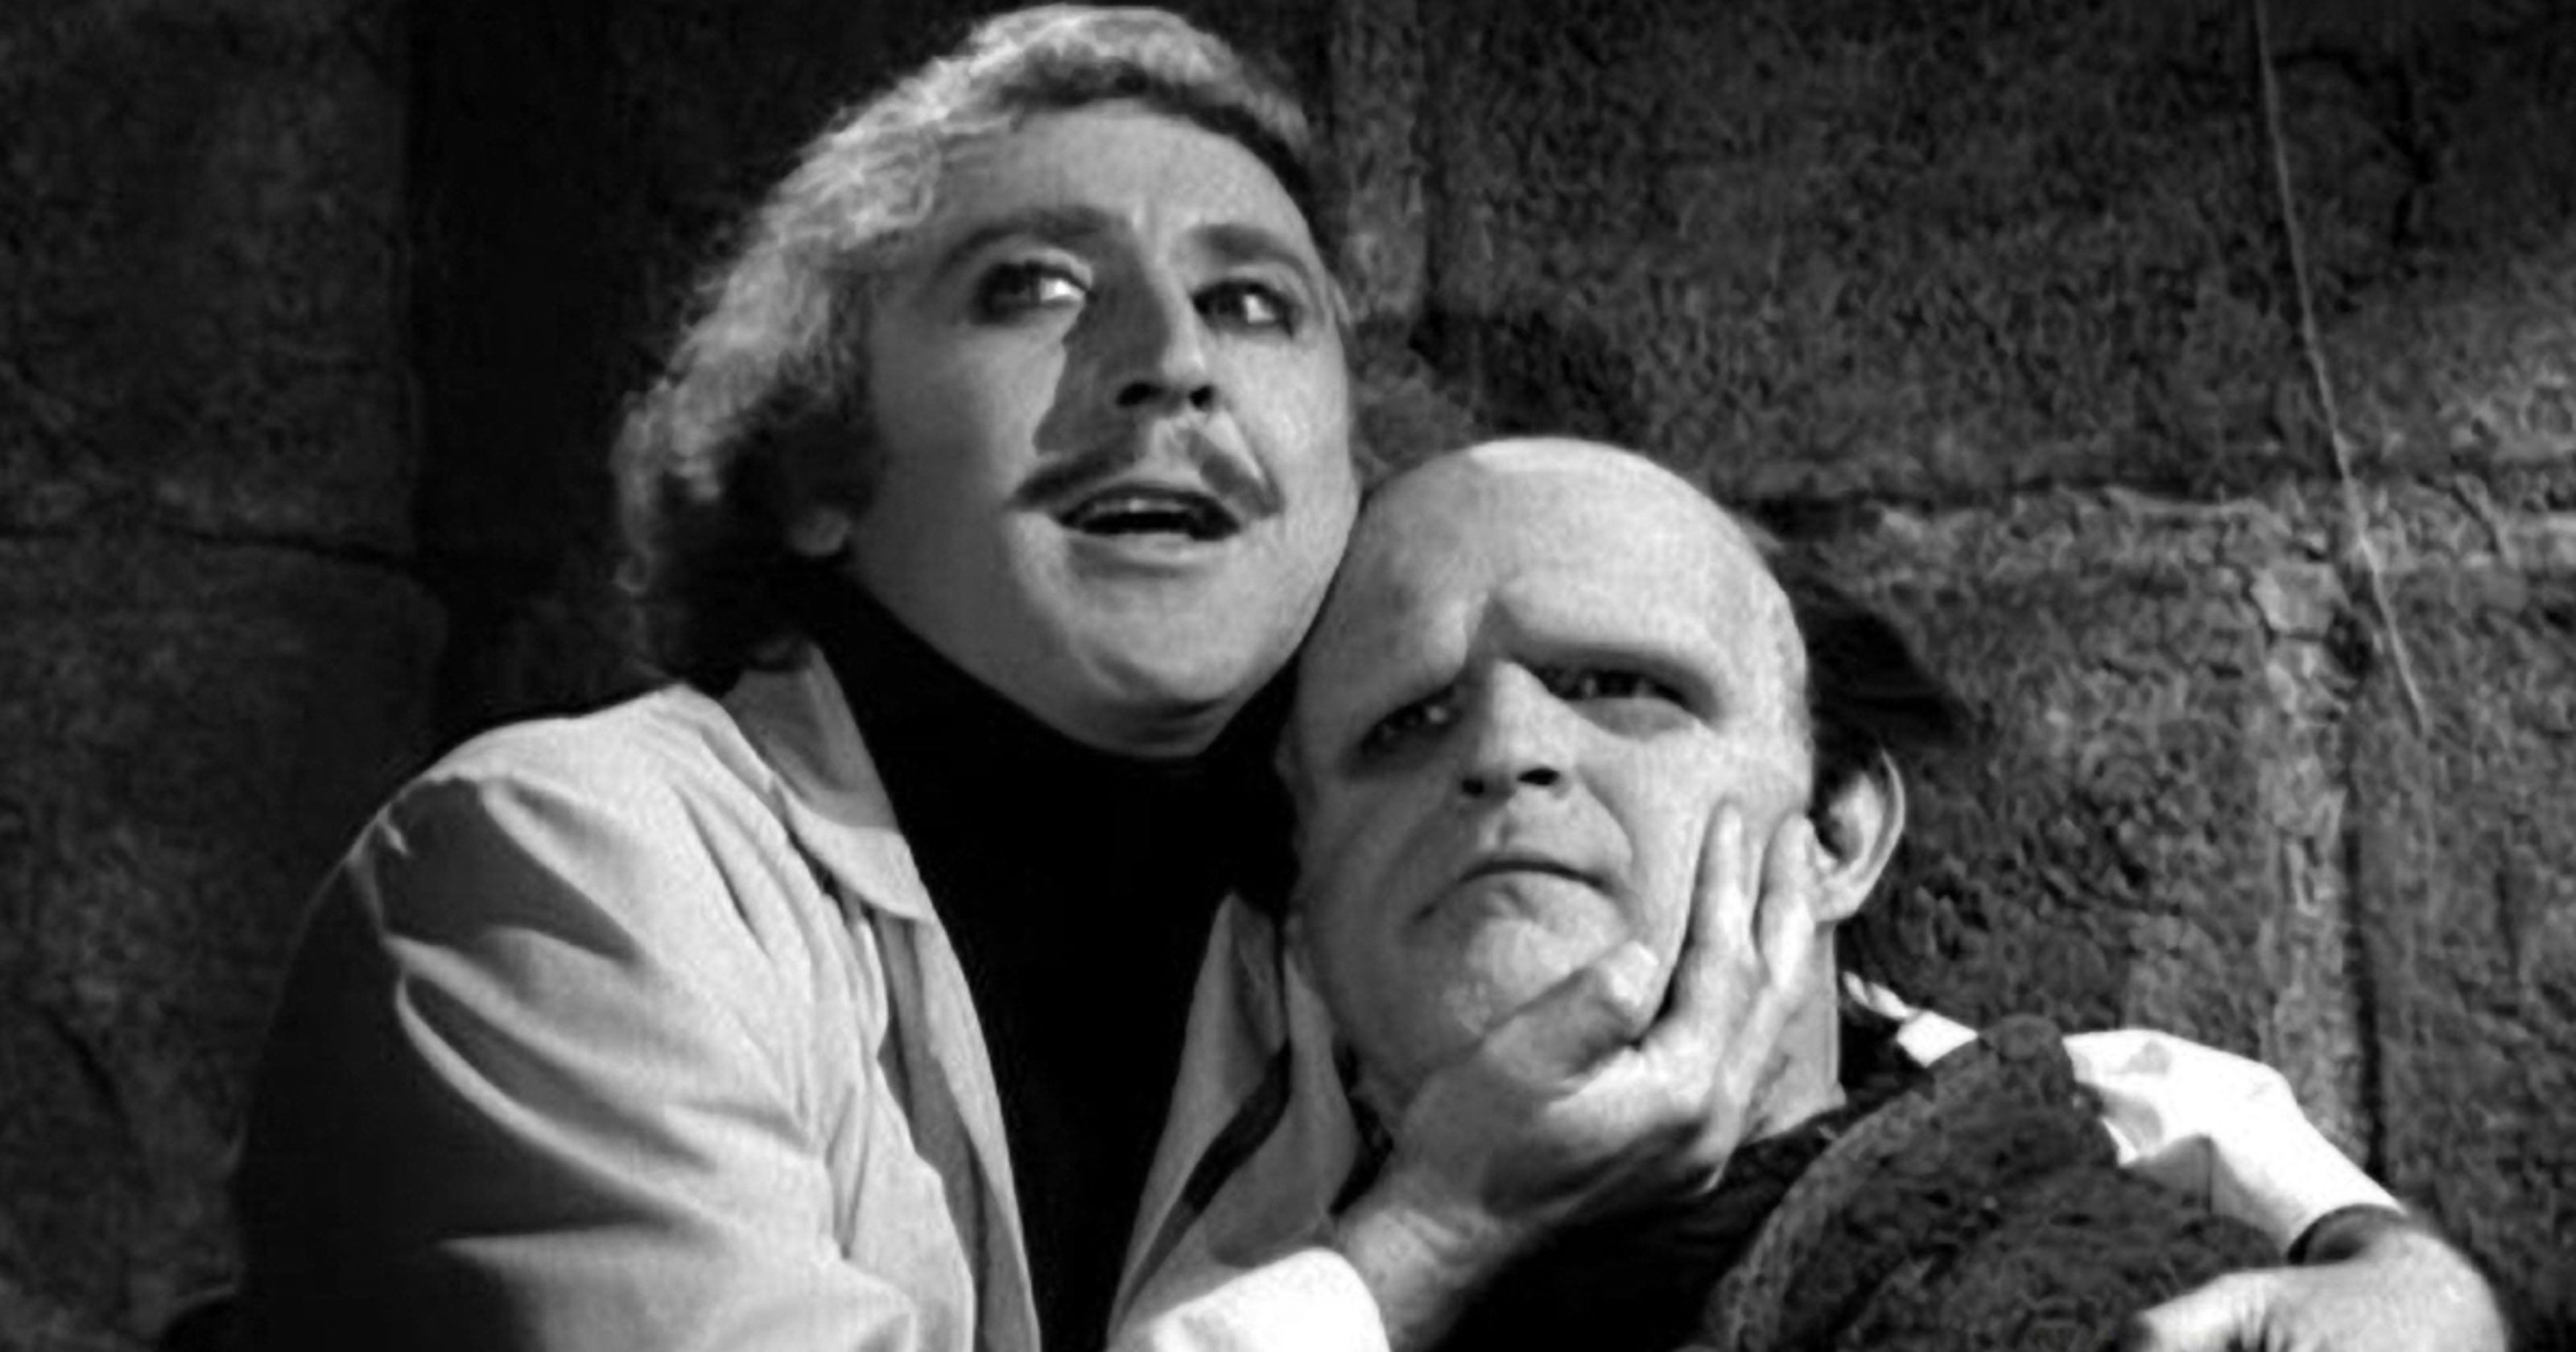 'Young Frankenstein' play dedicated to late Gene Wilder